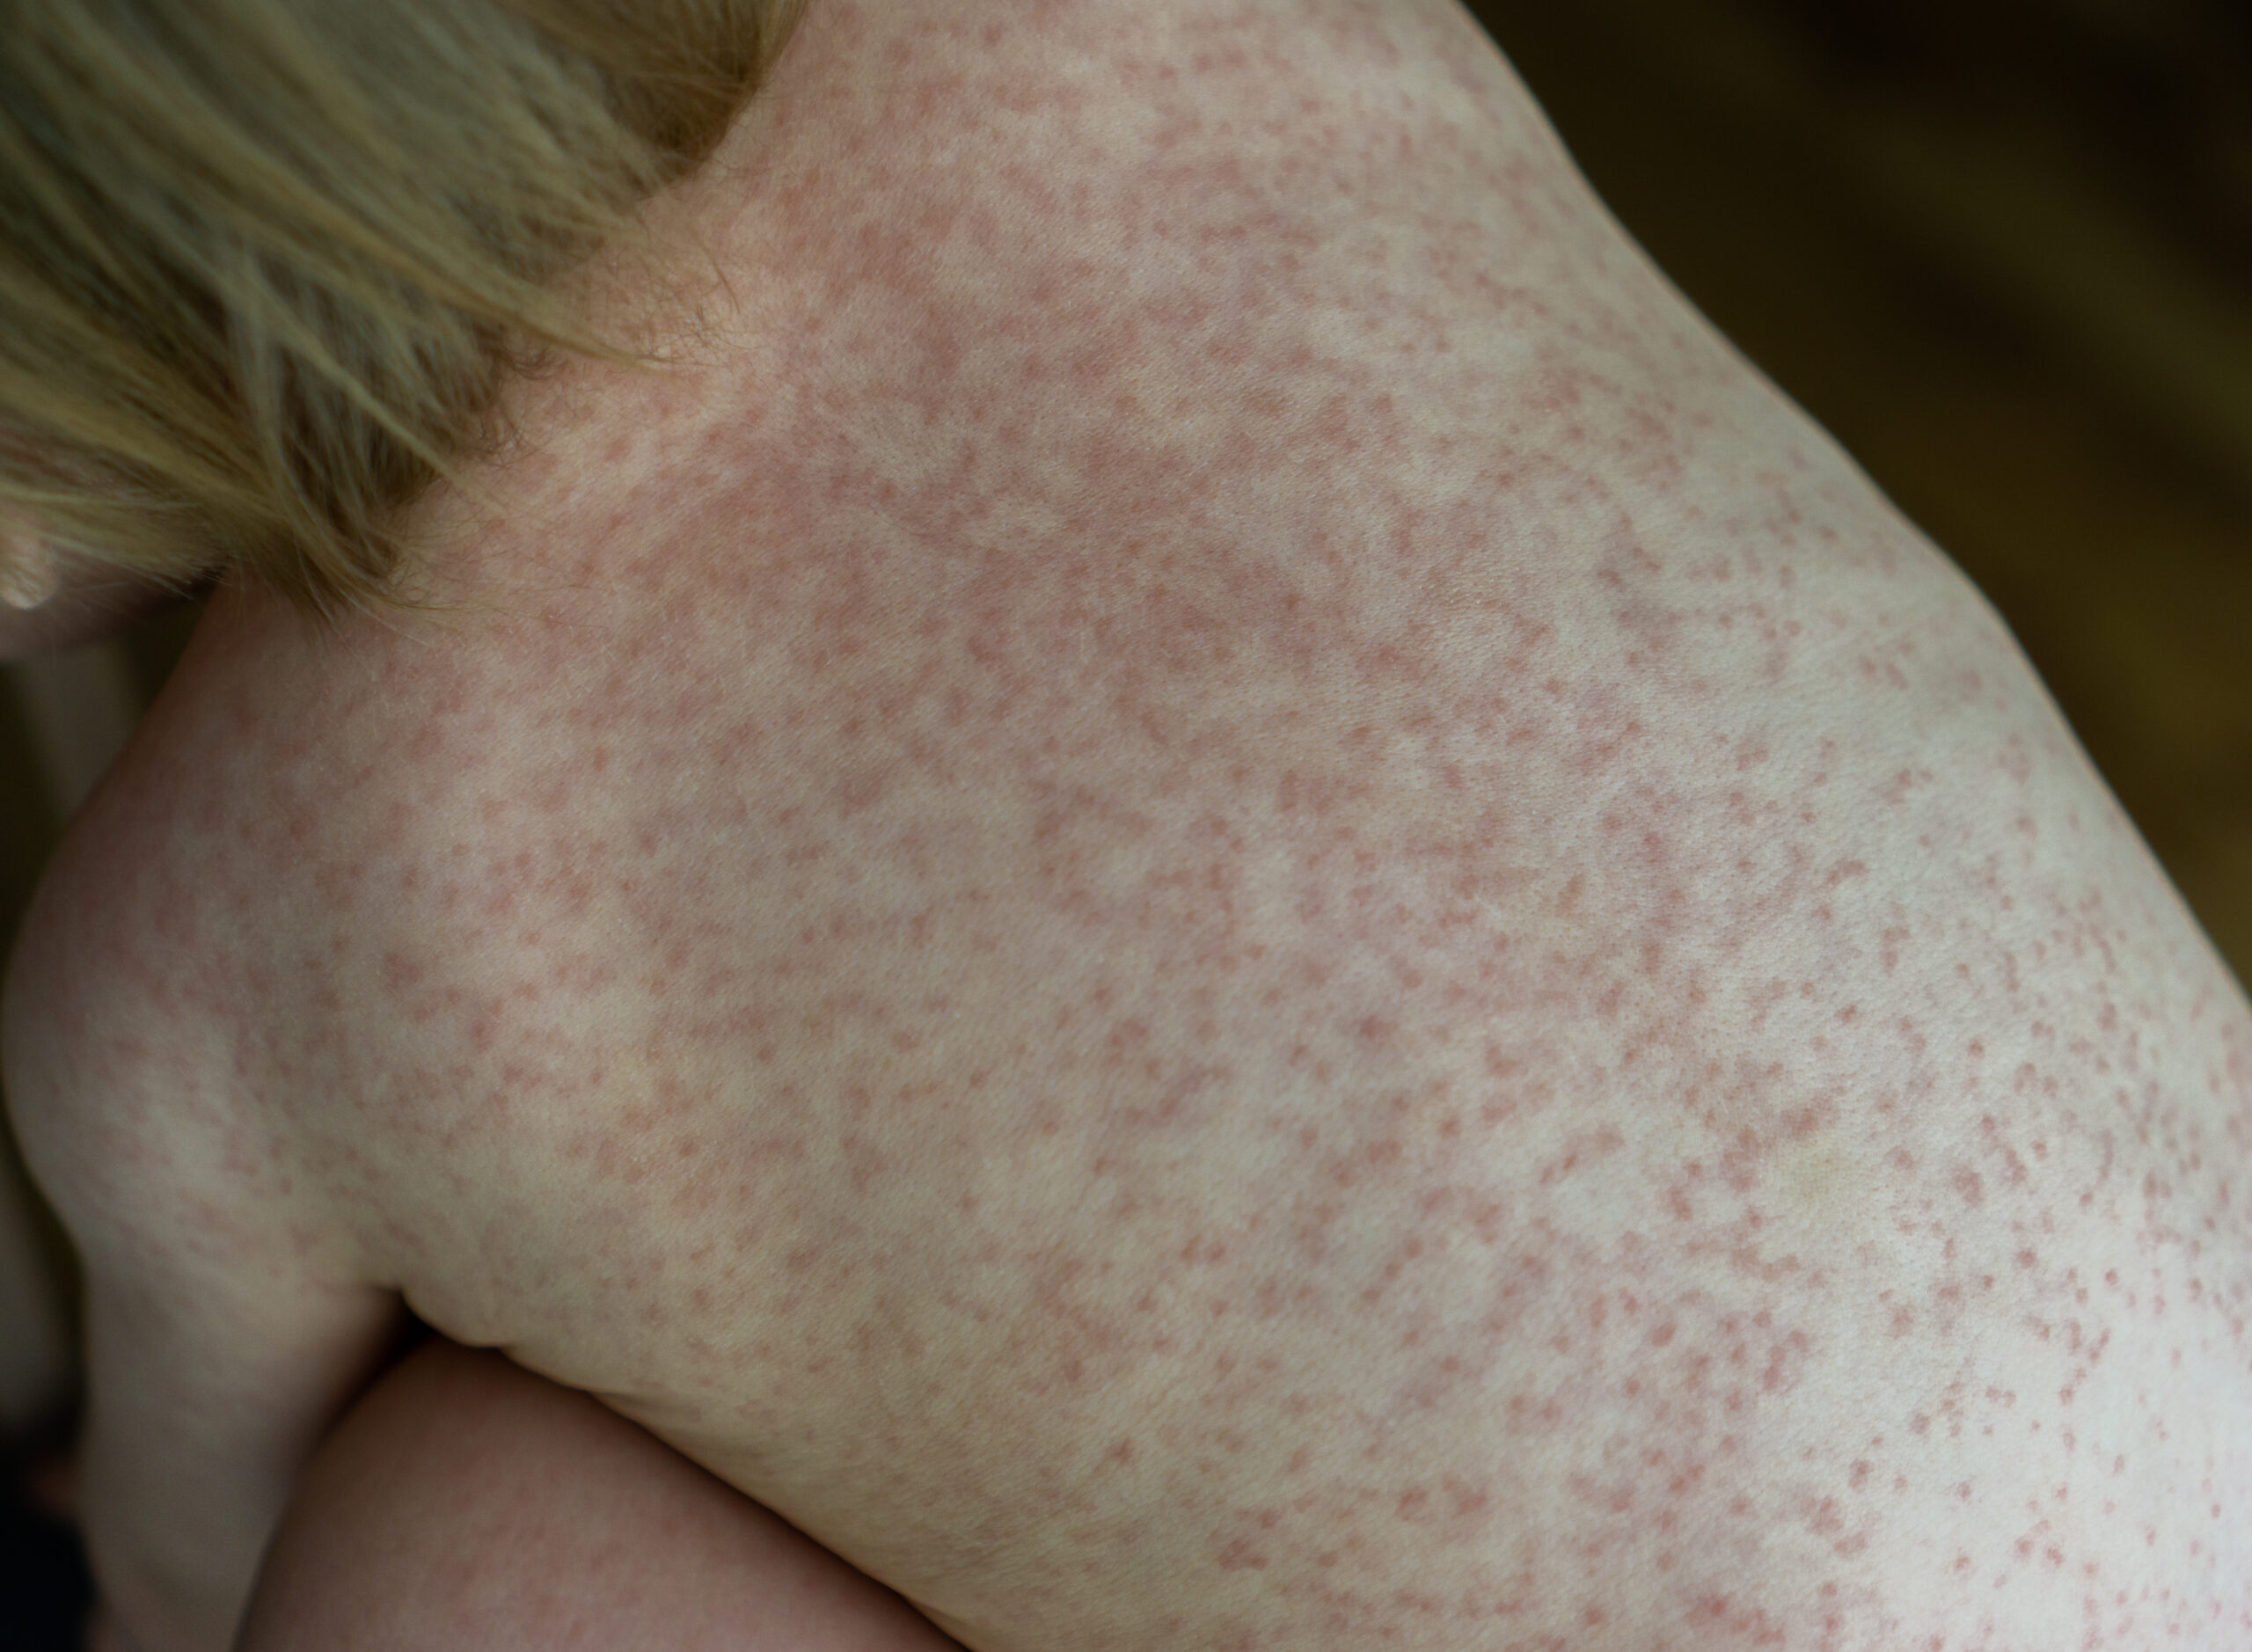 Roseola: What Is, Causes, Symptoms, Diagnosis, and Treatment